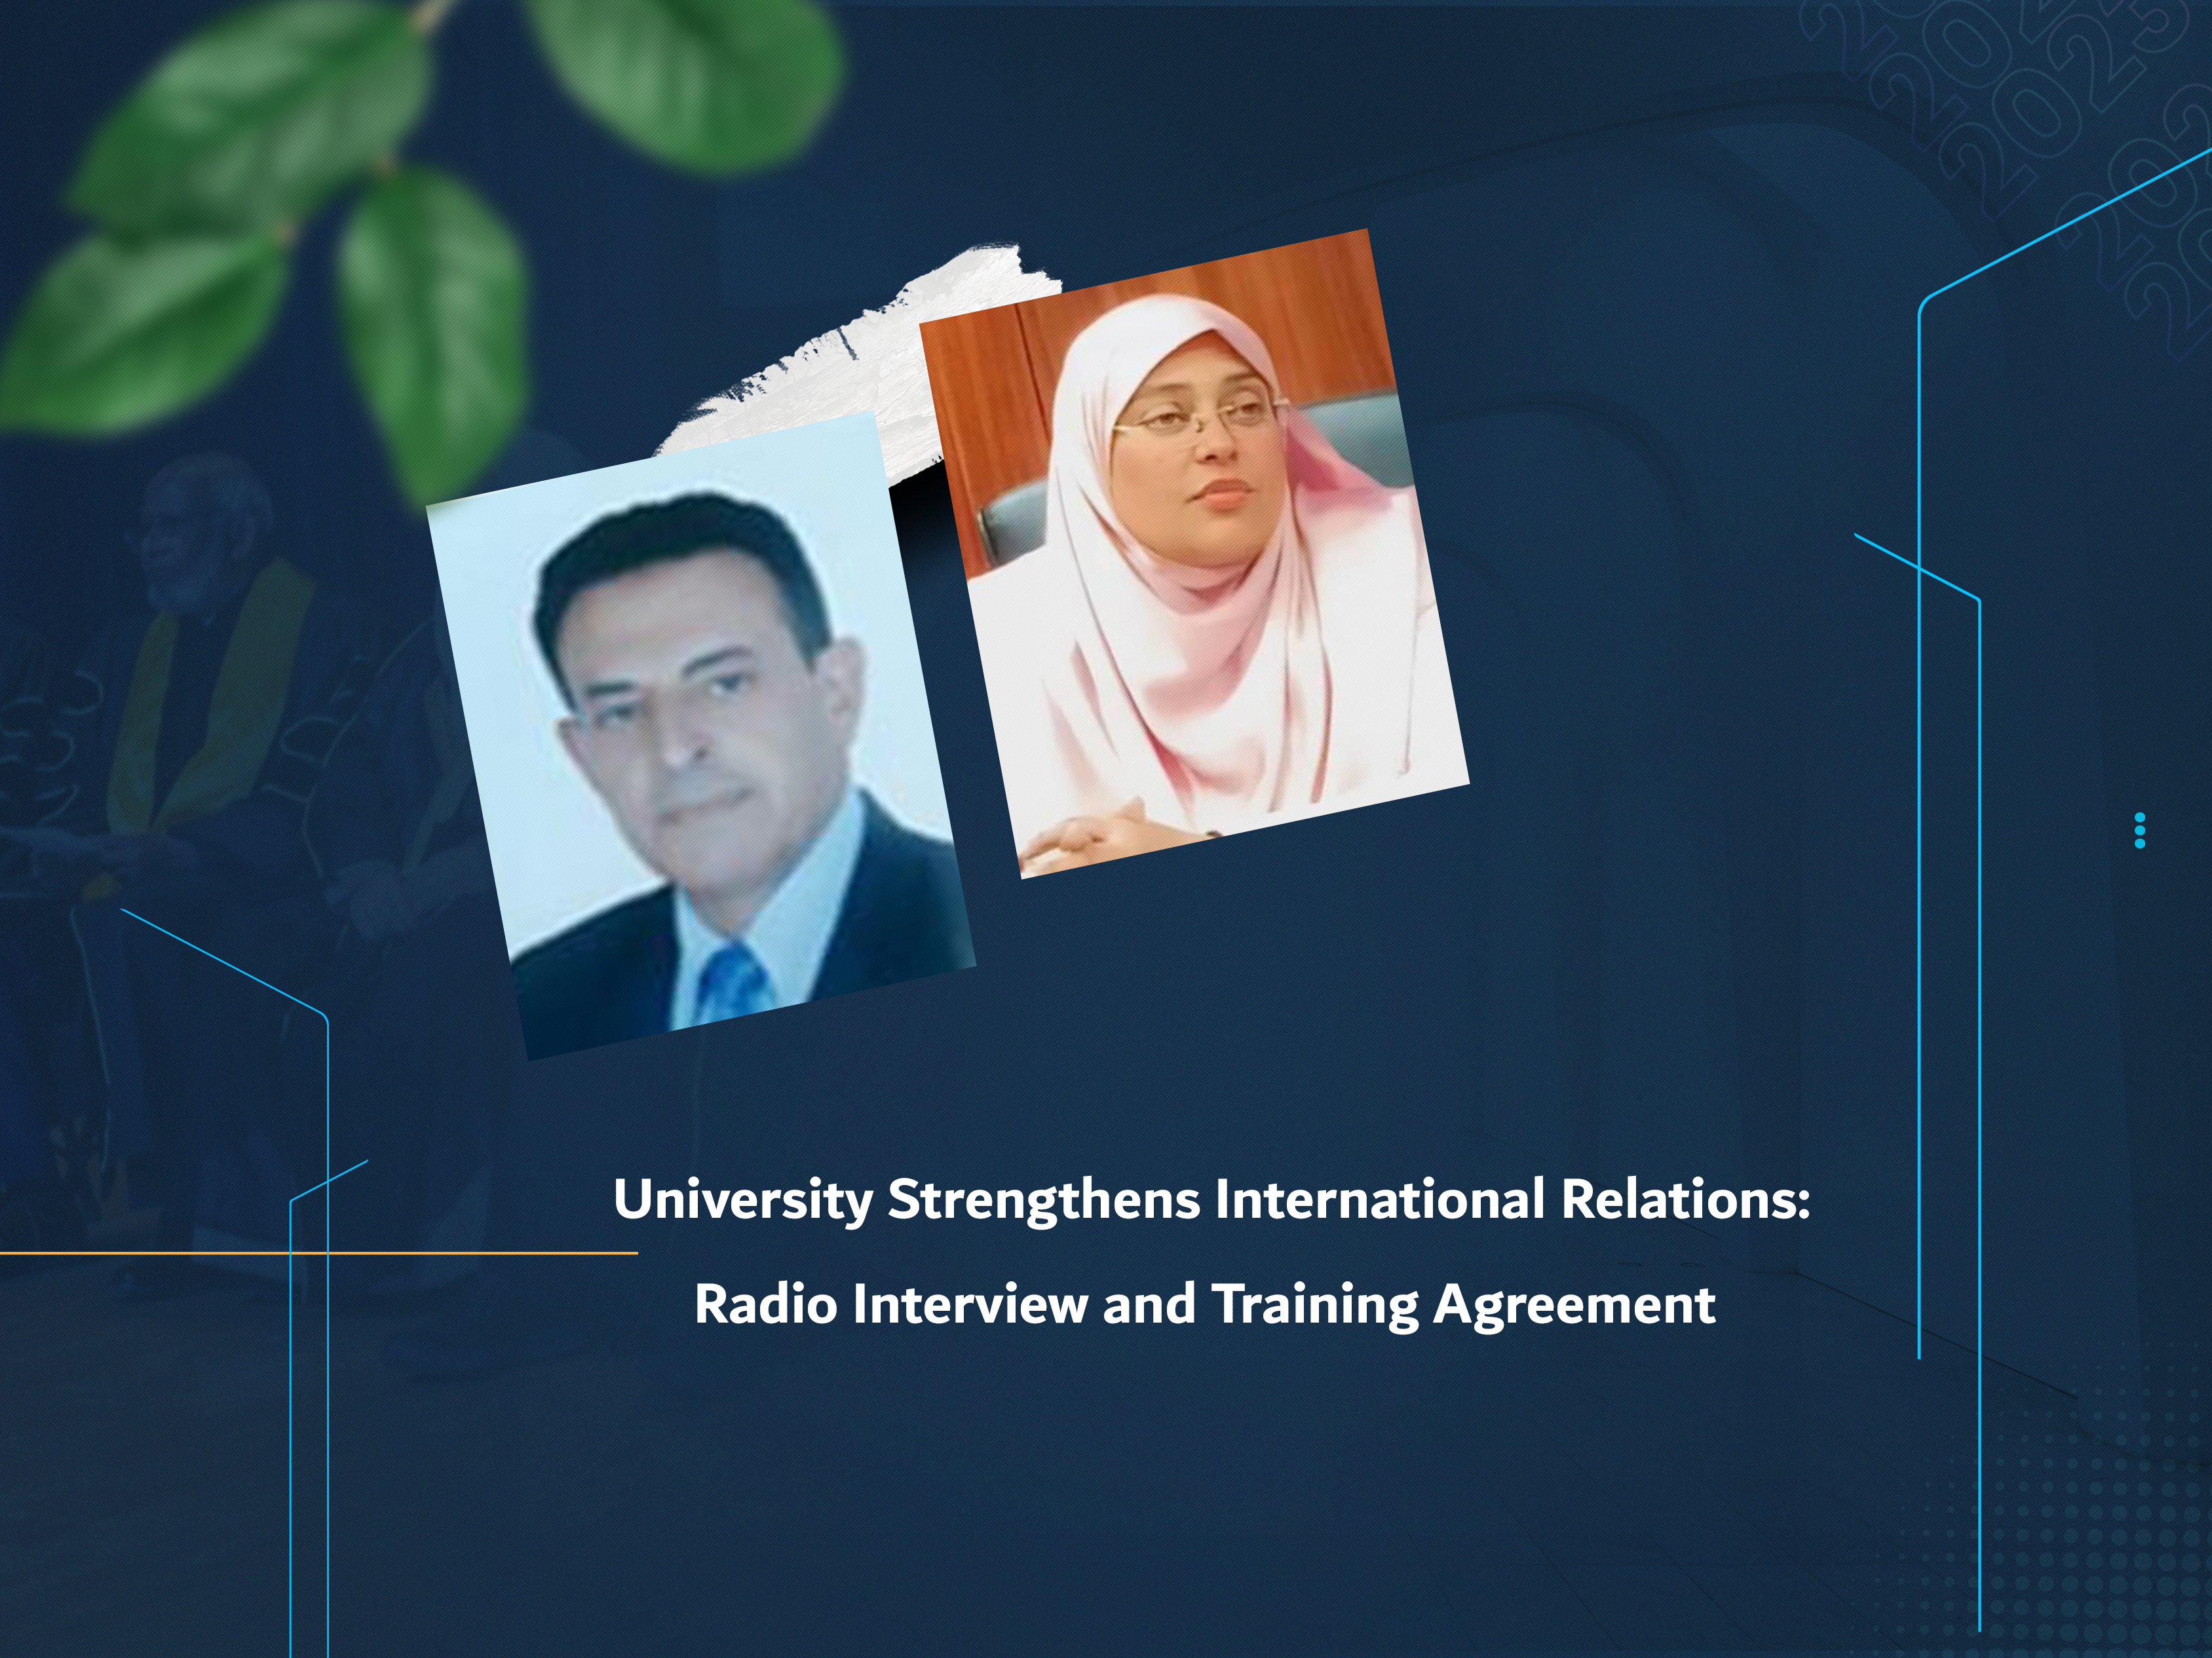 University Strengthens International Relations: Radio Interview and Training Agreement